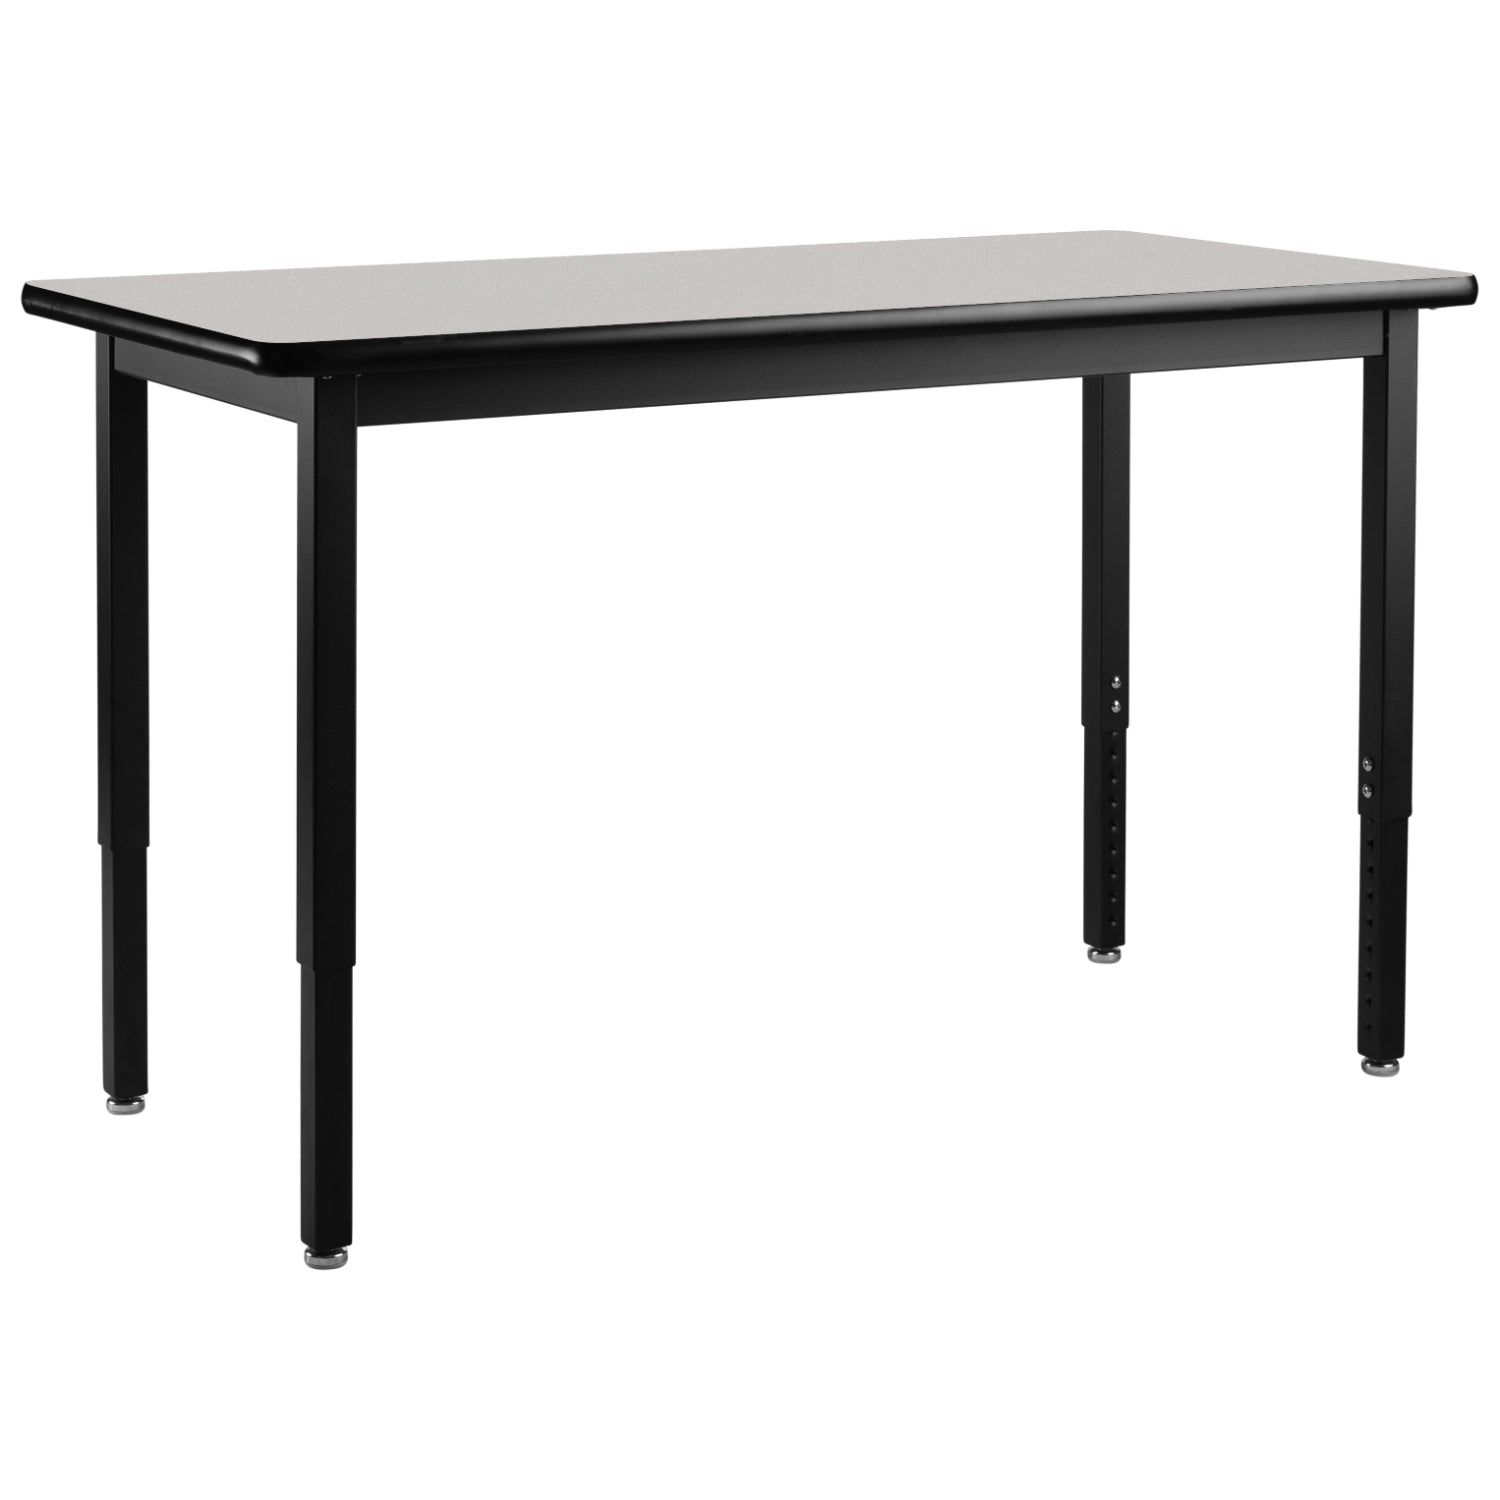 Heavy-Duty Height-Adjustable Utility Table, Black Frame, 18" x 48", High-Pressure Laminate Top with T-Mold Edge